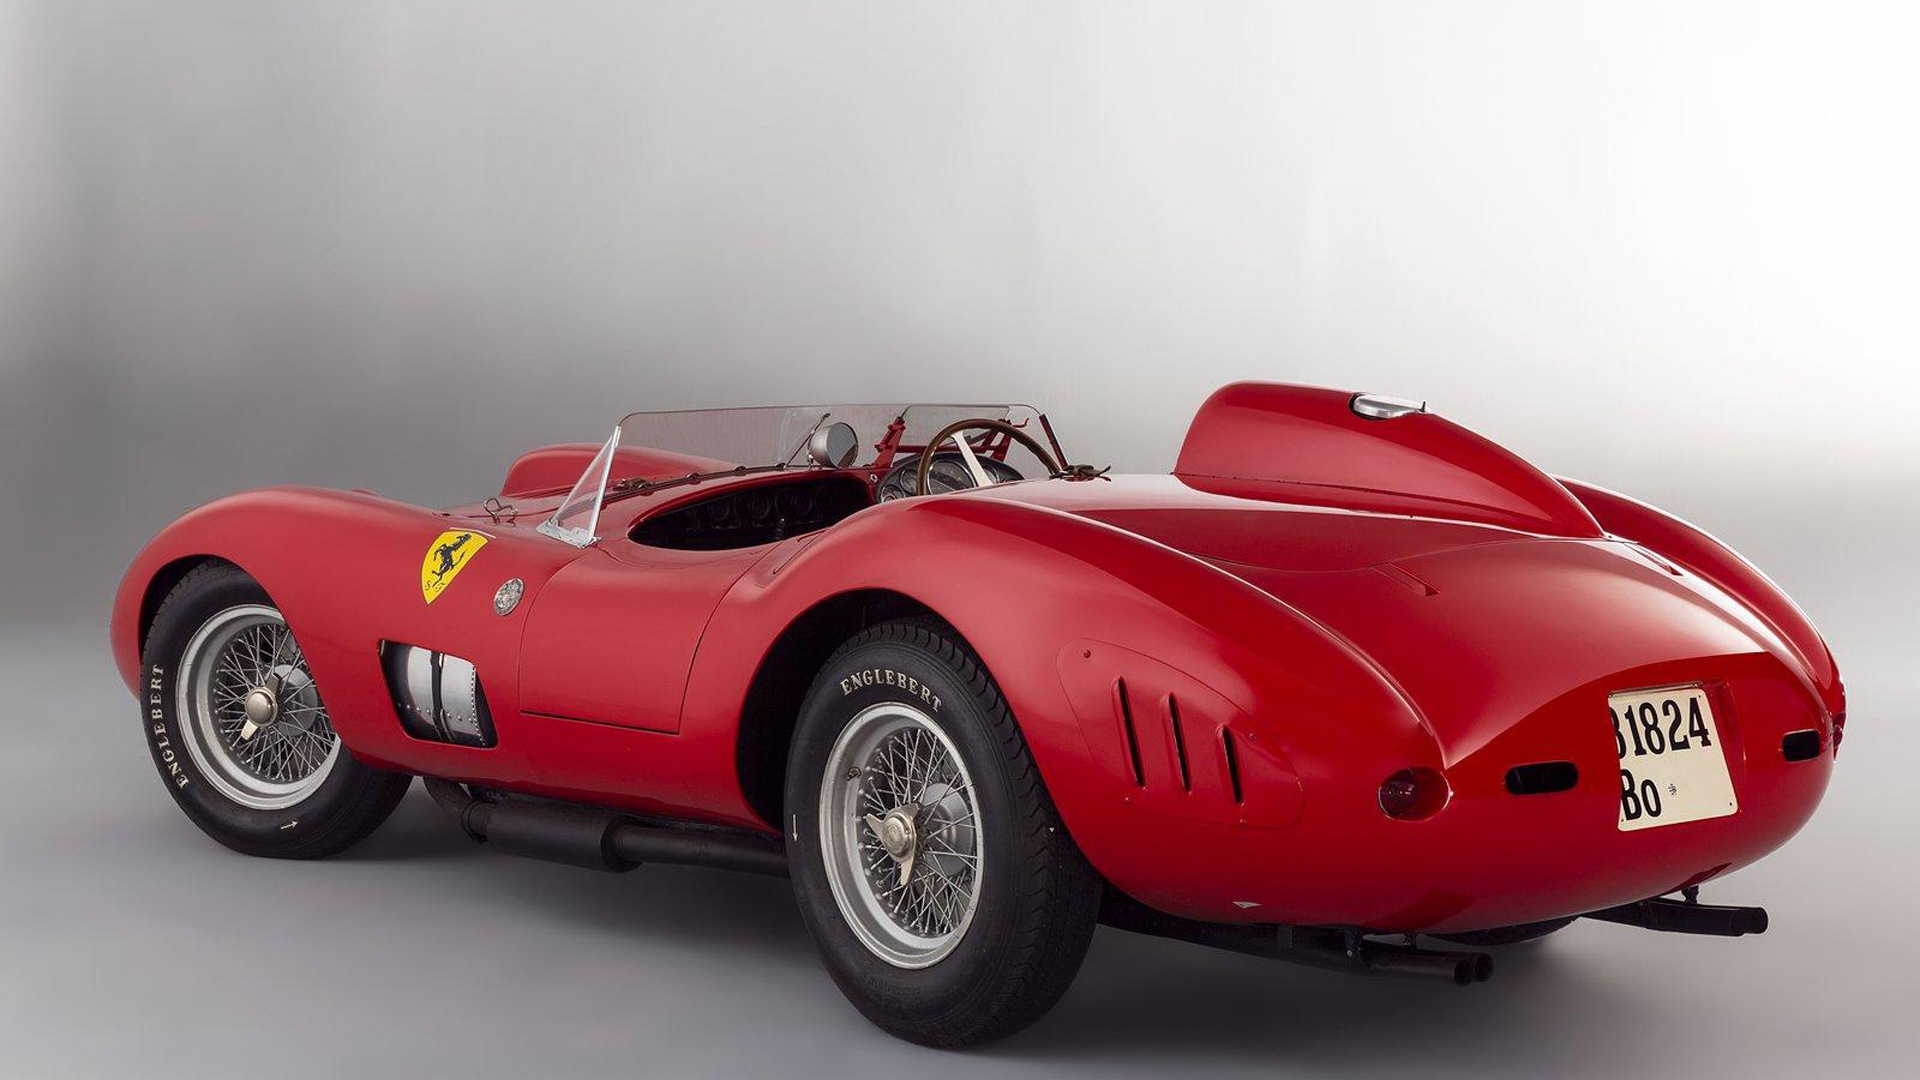 1957 Ferrari 335 S chassis number 0674